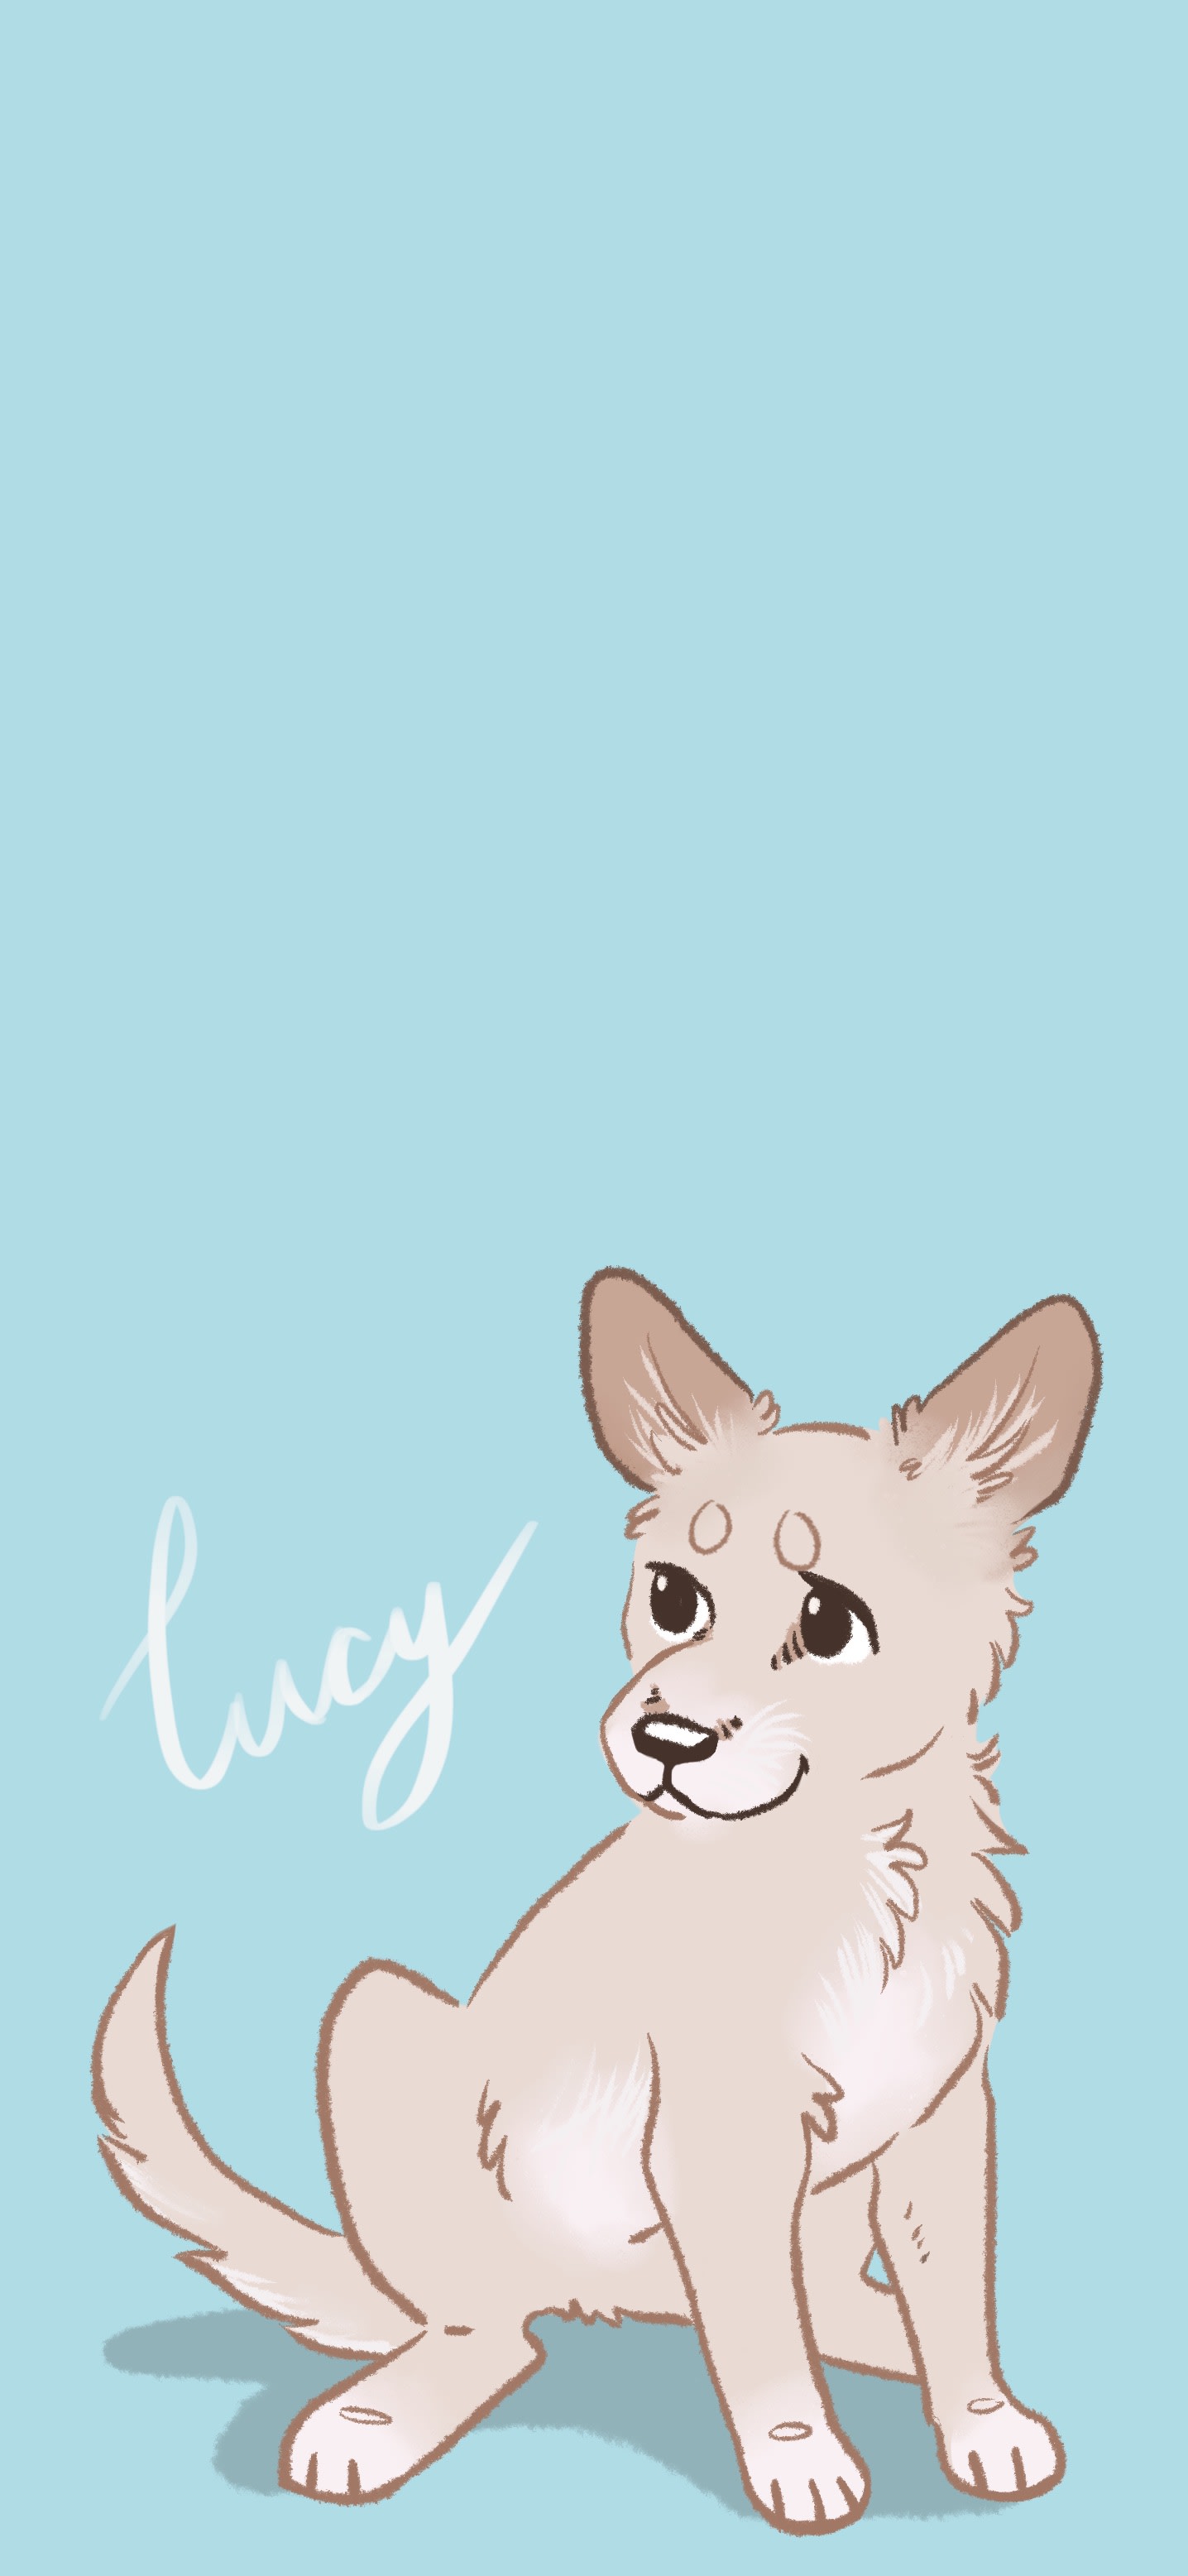 Draw a cute iphone wallpaper of your dog or cat